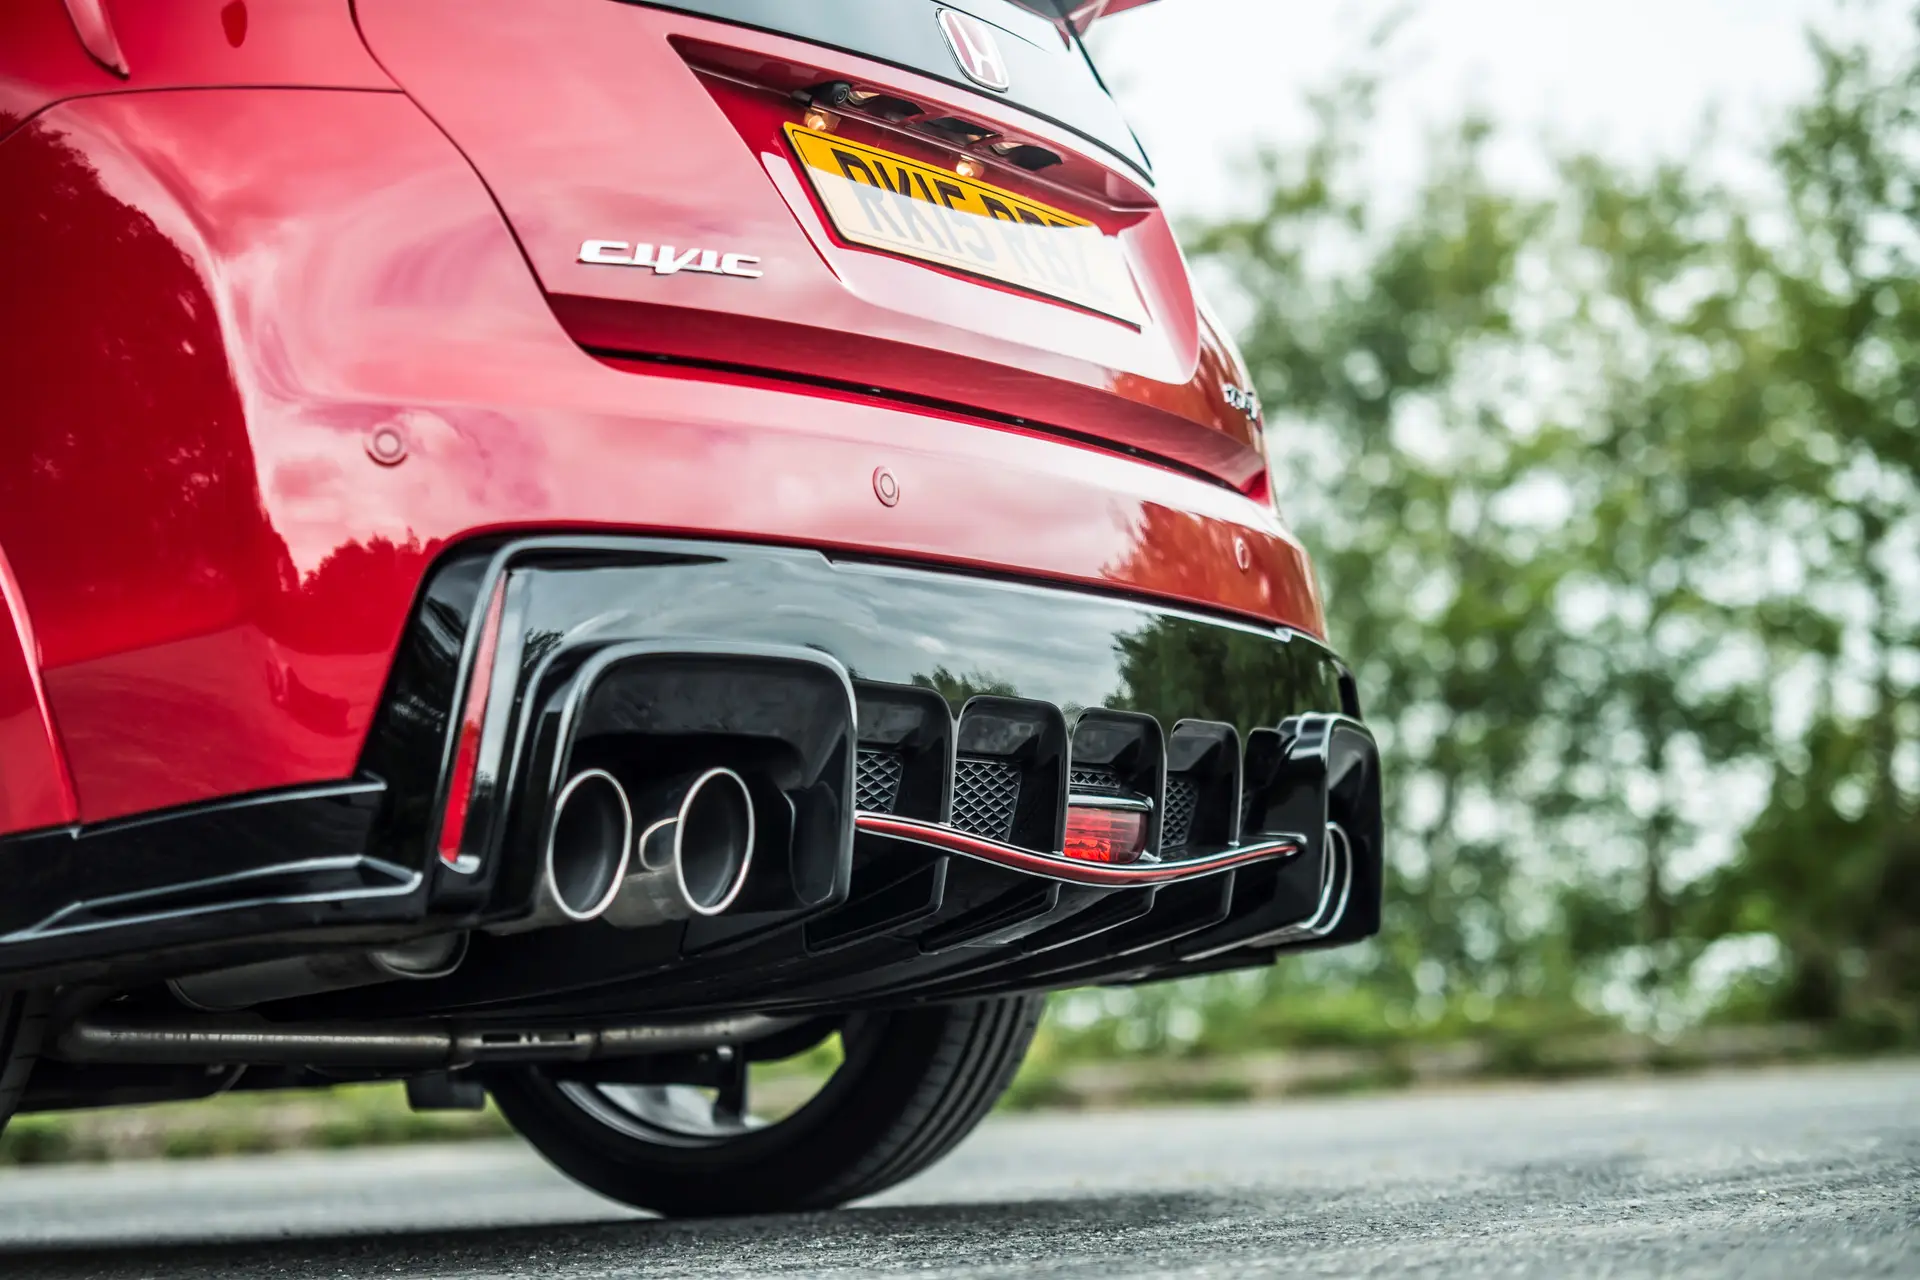 Honda Civic Type R (2015-2017) Review: exterior close up photo of the Honda Civic Type R exhausts